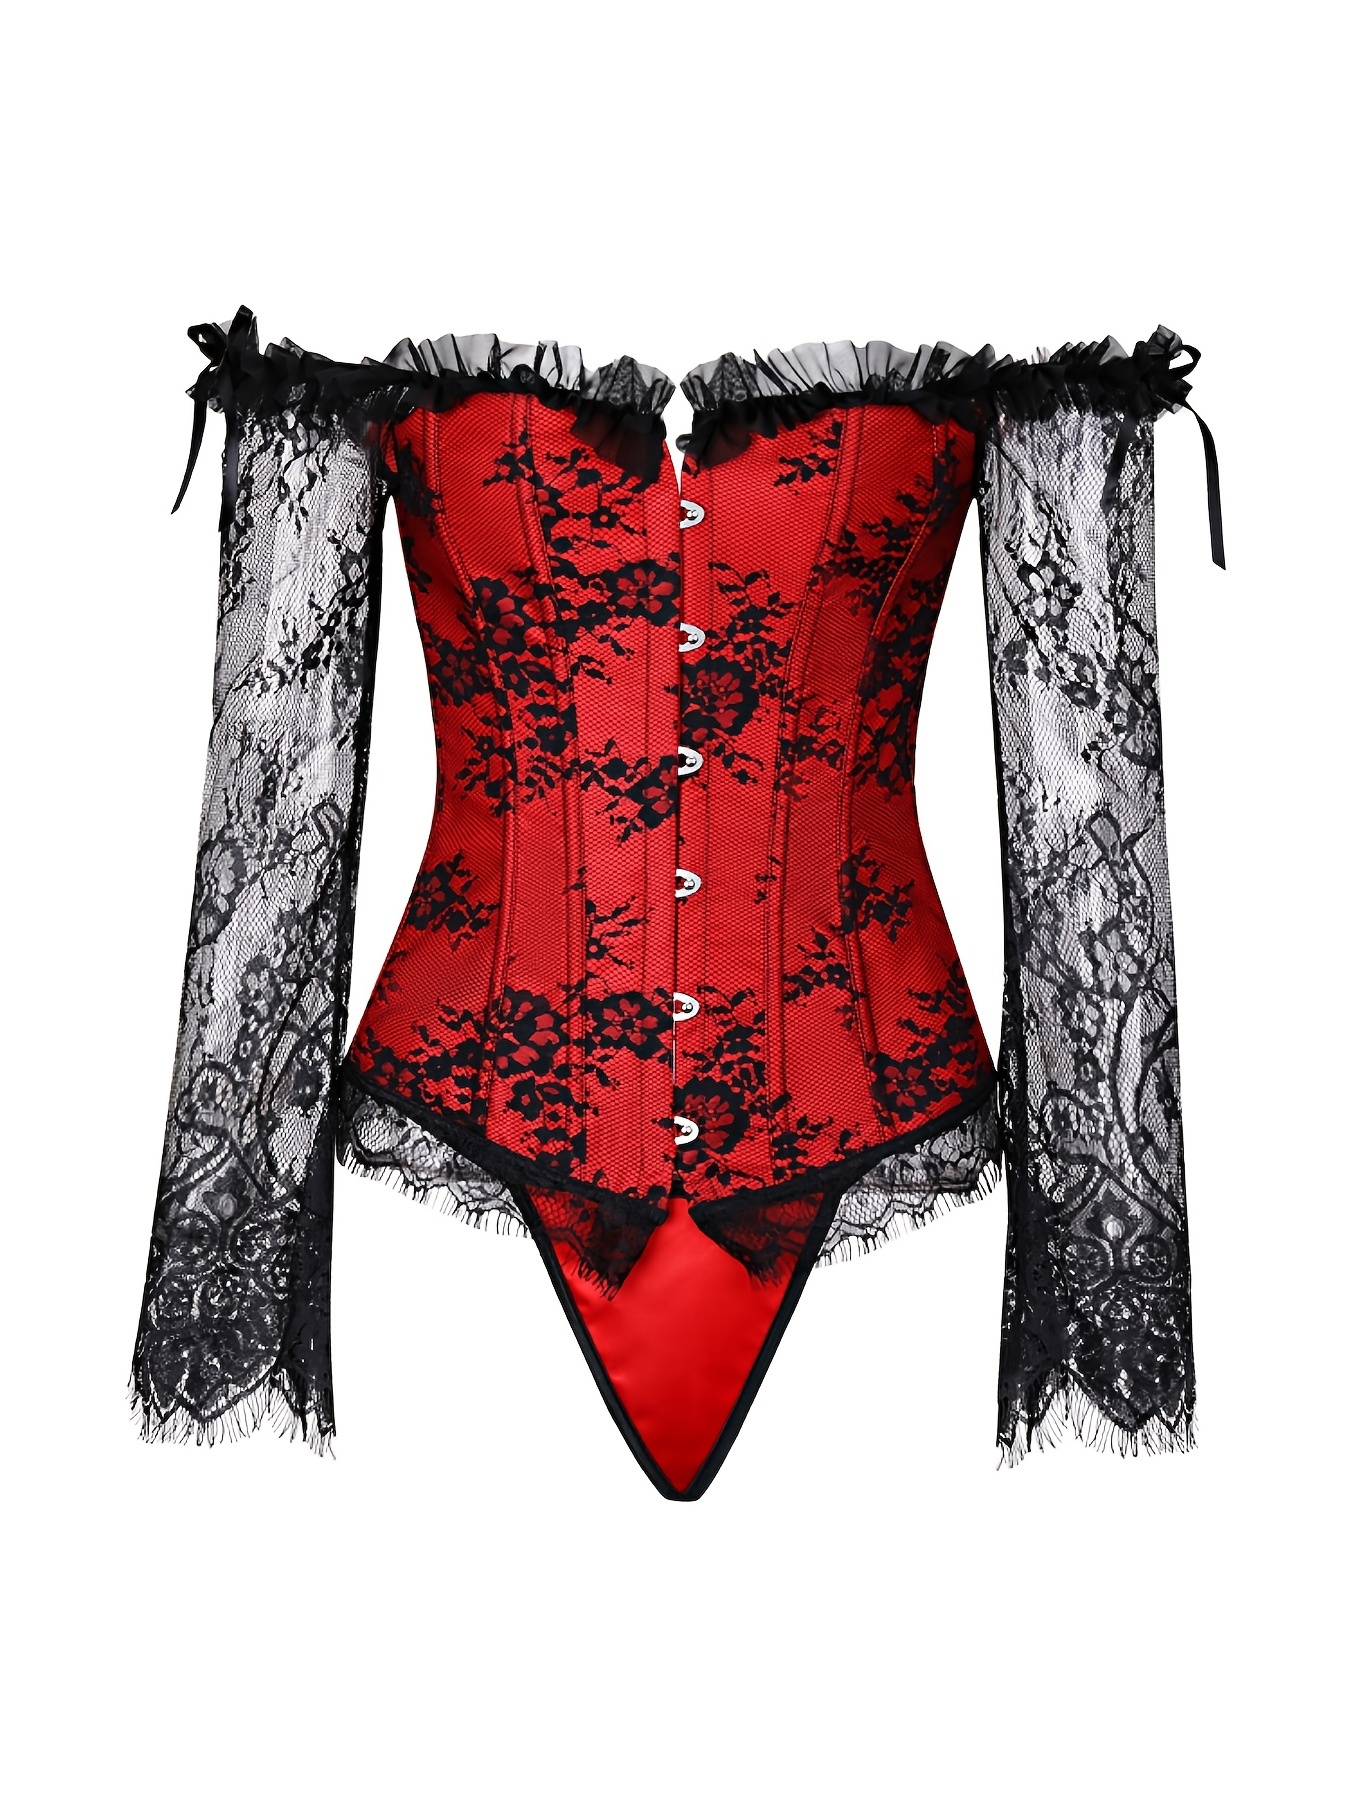 Medieval Corset Tops for Women Plus Size Corsets for Women Black Bustier  Lingerie for Party Costume Dress Bustier Top Gothic Shapewear Sexy  Underwear